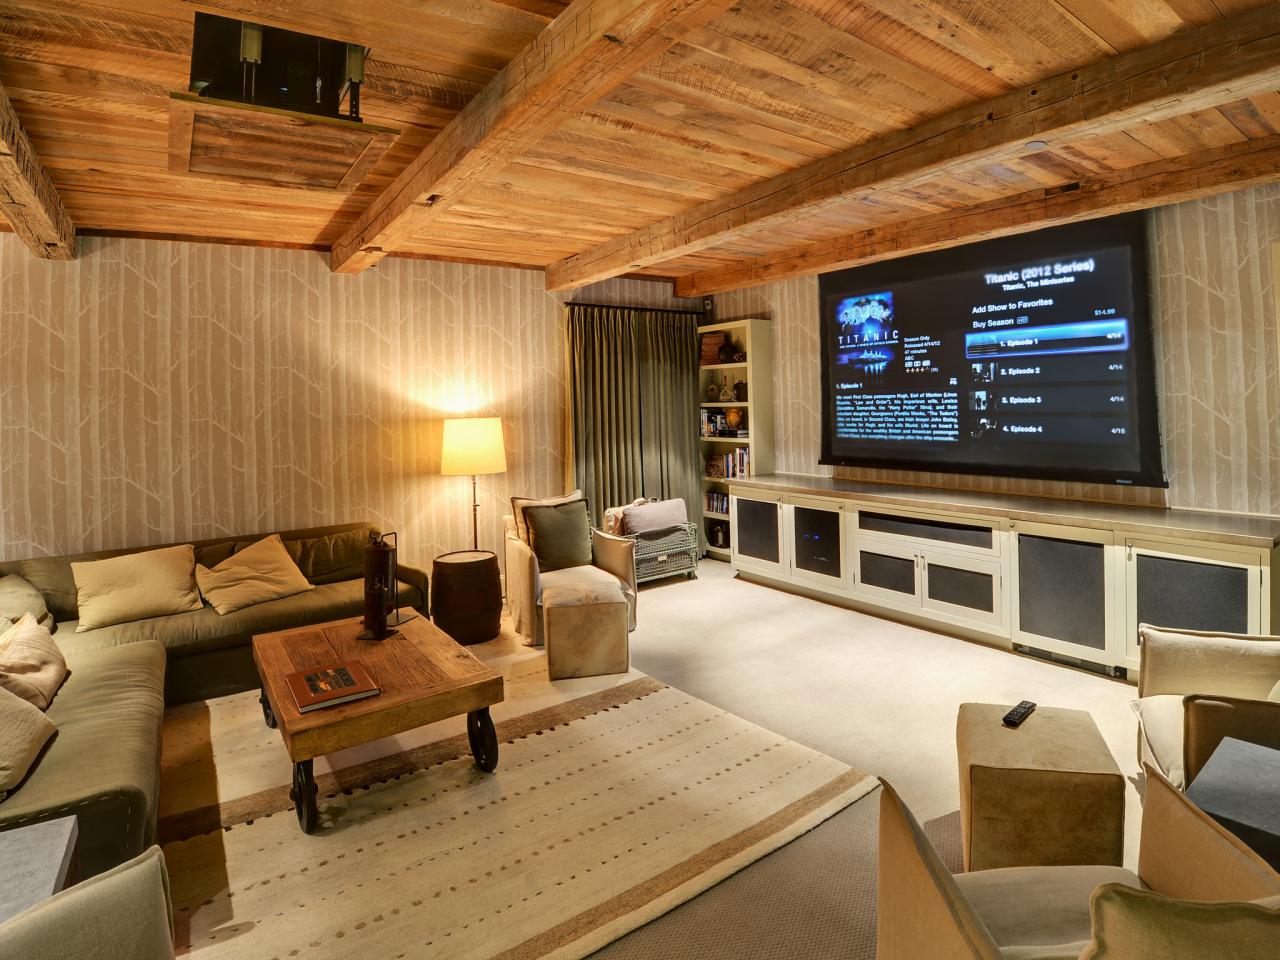 Creatice Media Room Ideas for Large Space